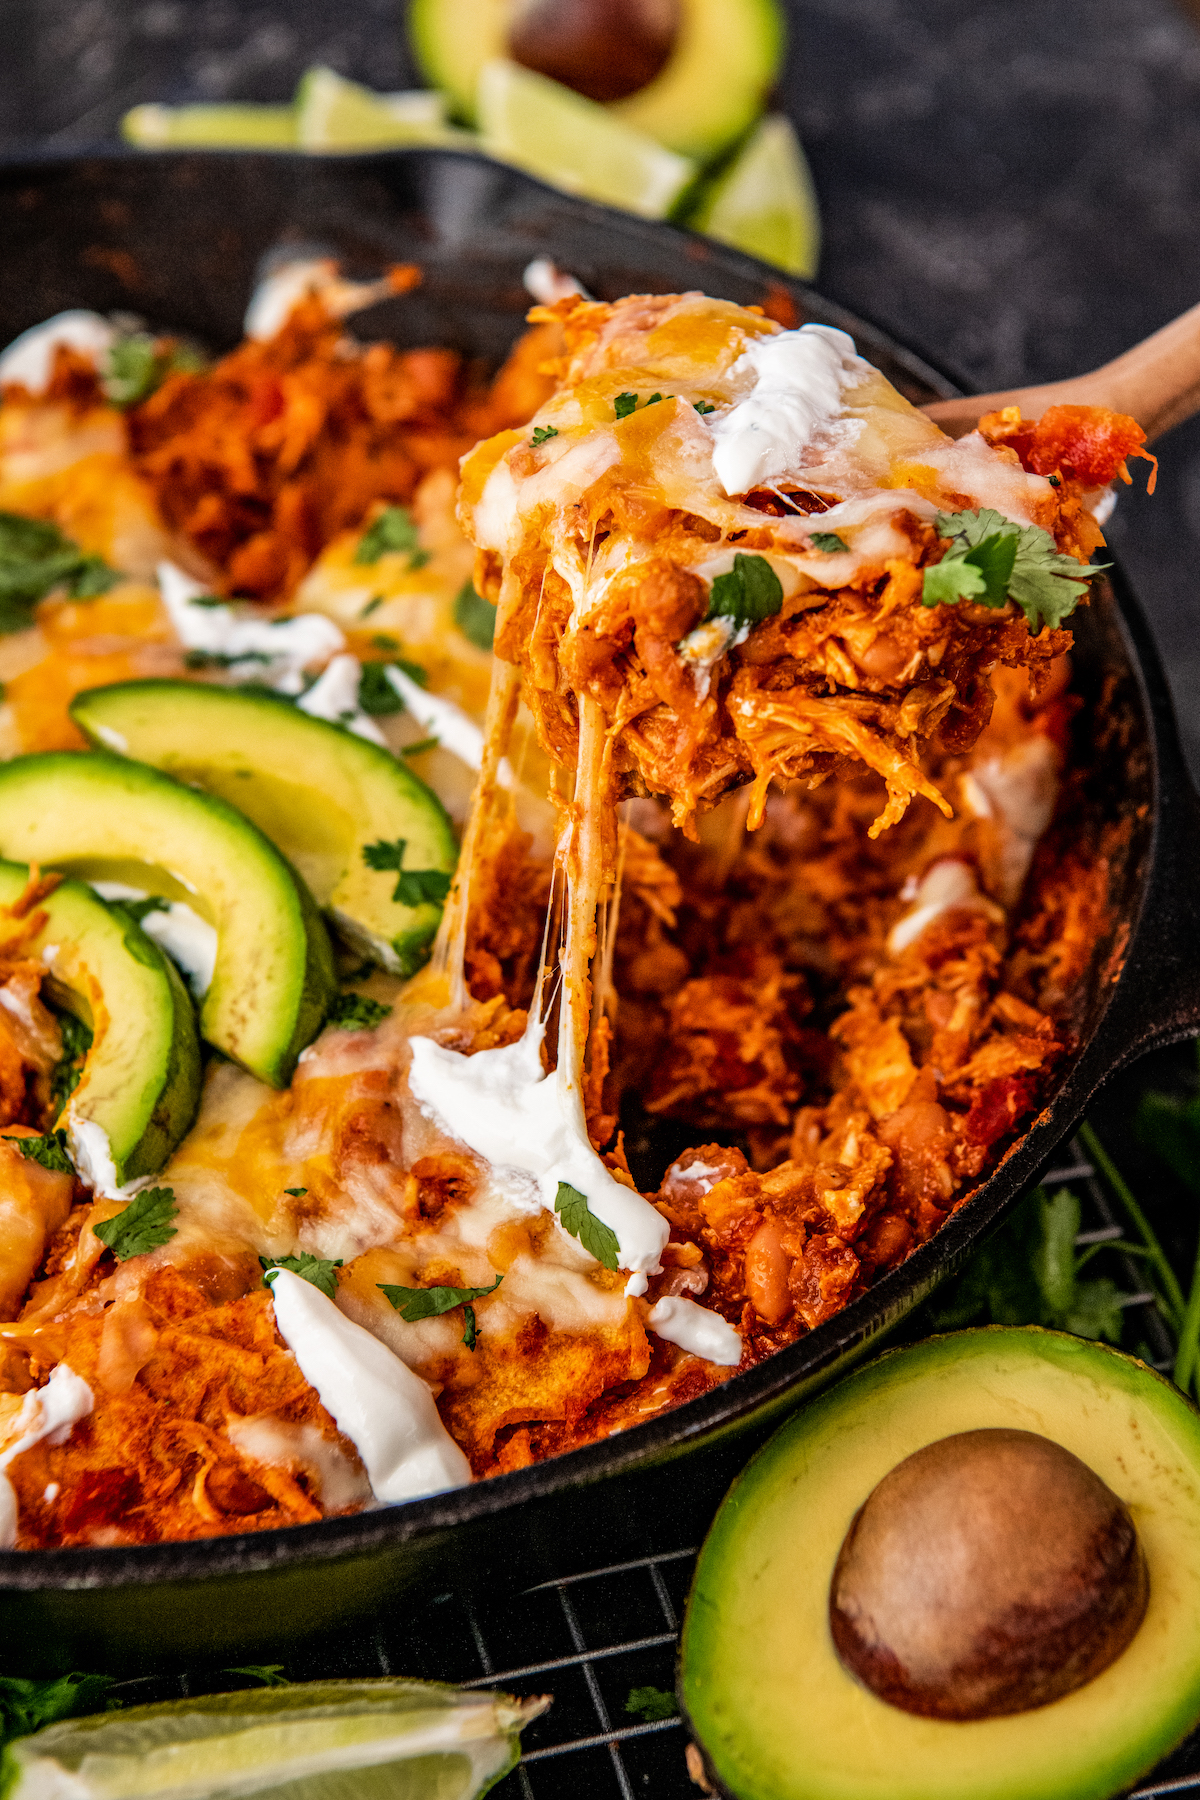 A large spoon is scooping out a portion of chicken enchiladas from a black skillet.